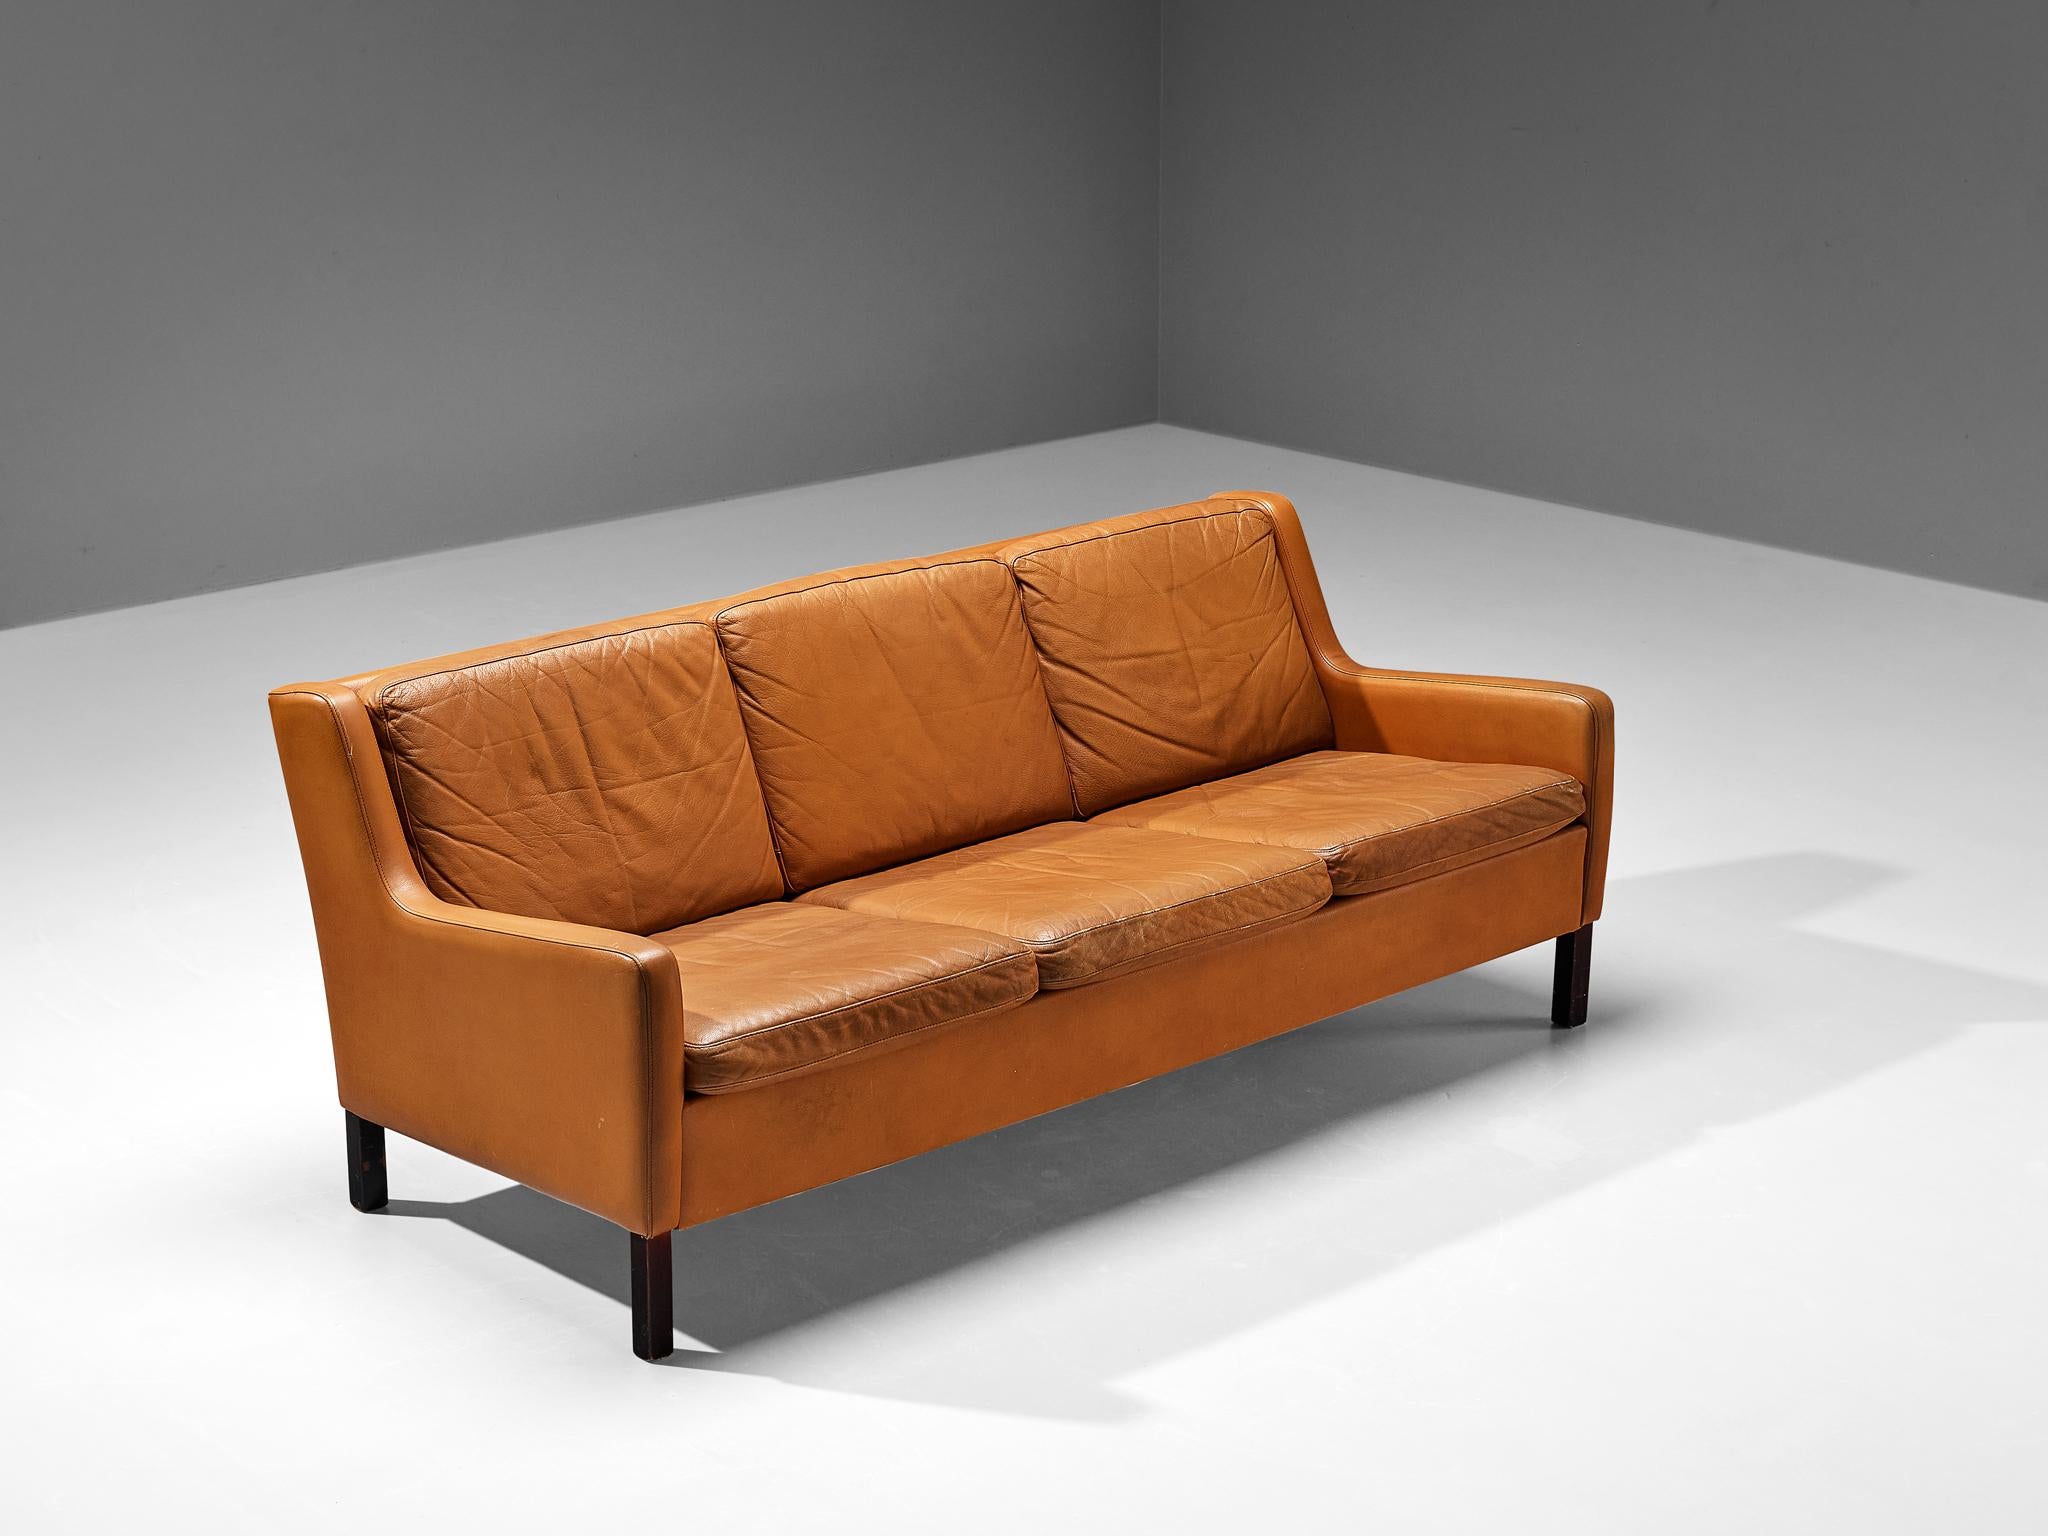 Three-seat sofa, cognac to orange leather and oak, Denmark, ca. 1960. 

This modest and comfortable three-seat sofa that shows traits of the design of Borge Møgensen. The colour palette of the orange-cognac leather and the dark stained legs create a